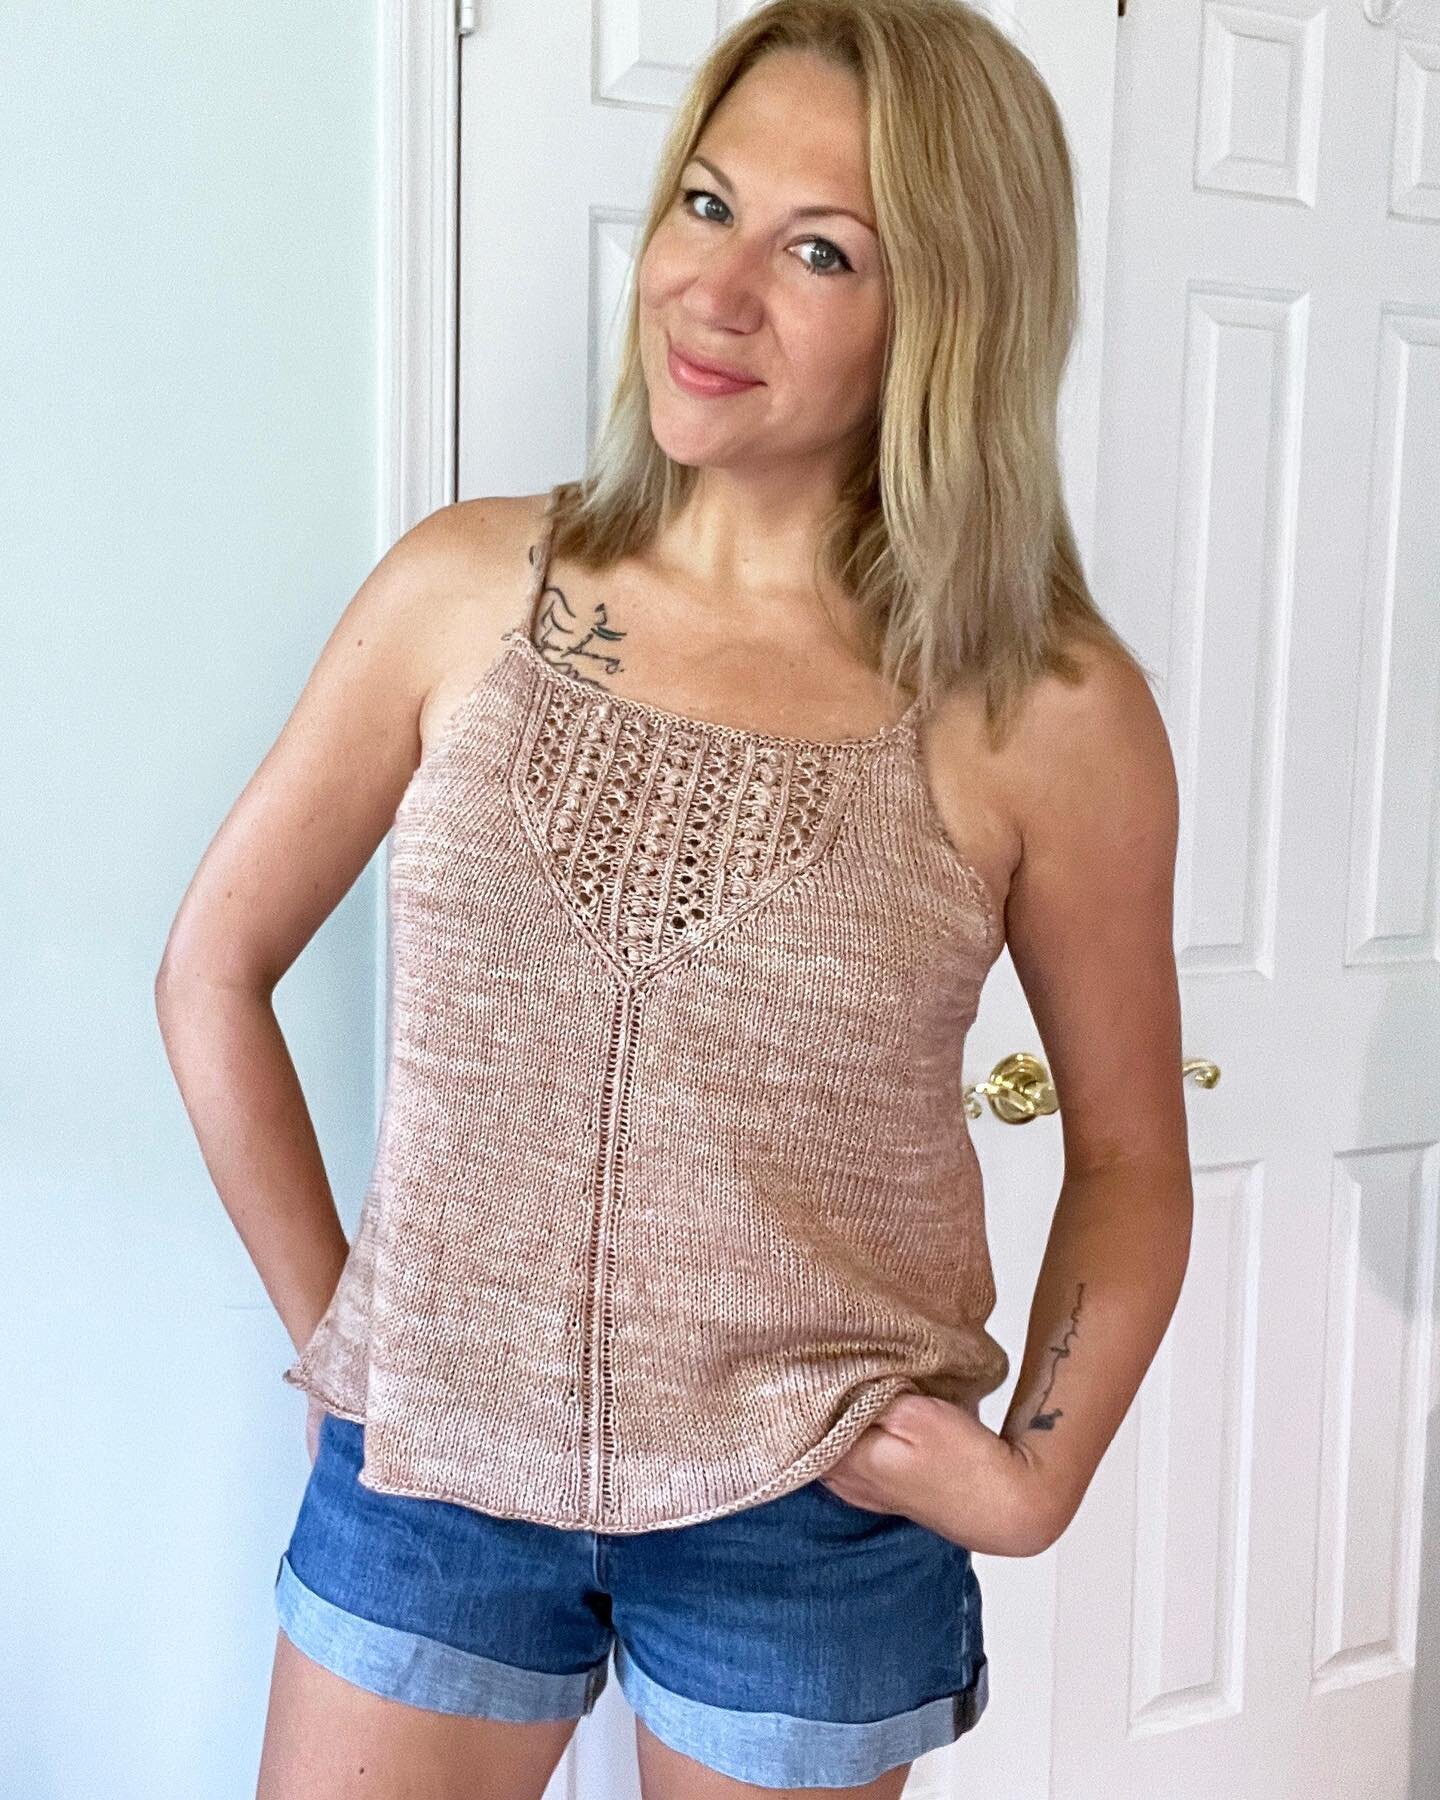 And it&rsquo;s done! My Gelato Tank top (by @gabrielleknits ) is all finished, blocked, and looking gorgeous in @magpiefibers Equinox. 
I knit the A-line shaped body and my only modification was to skip the garter stitch hem and go with a rolled hem 